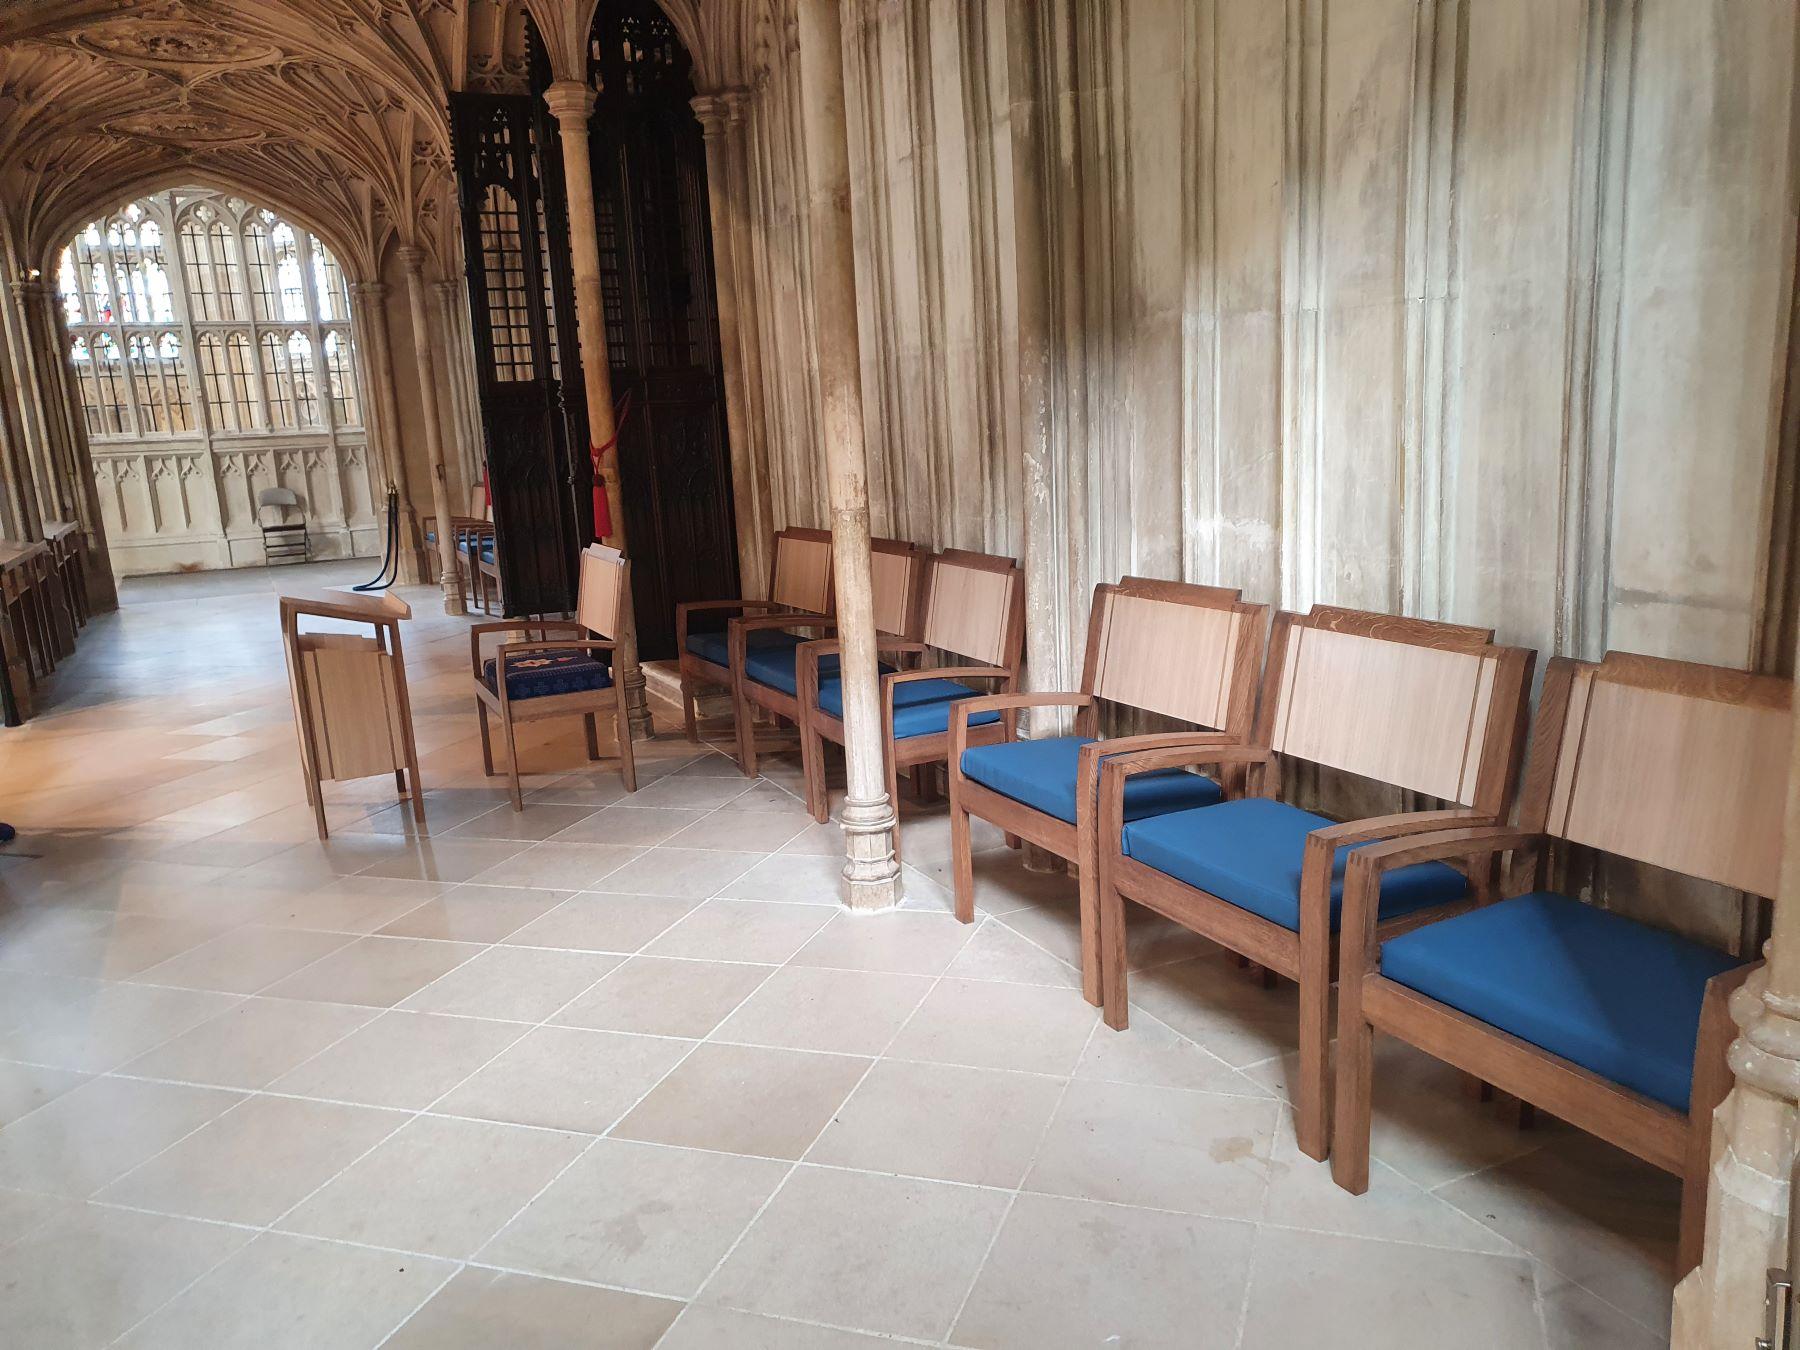 St Georges Chapel, Windsor Castle, Military Knights and Military General seating and readers